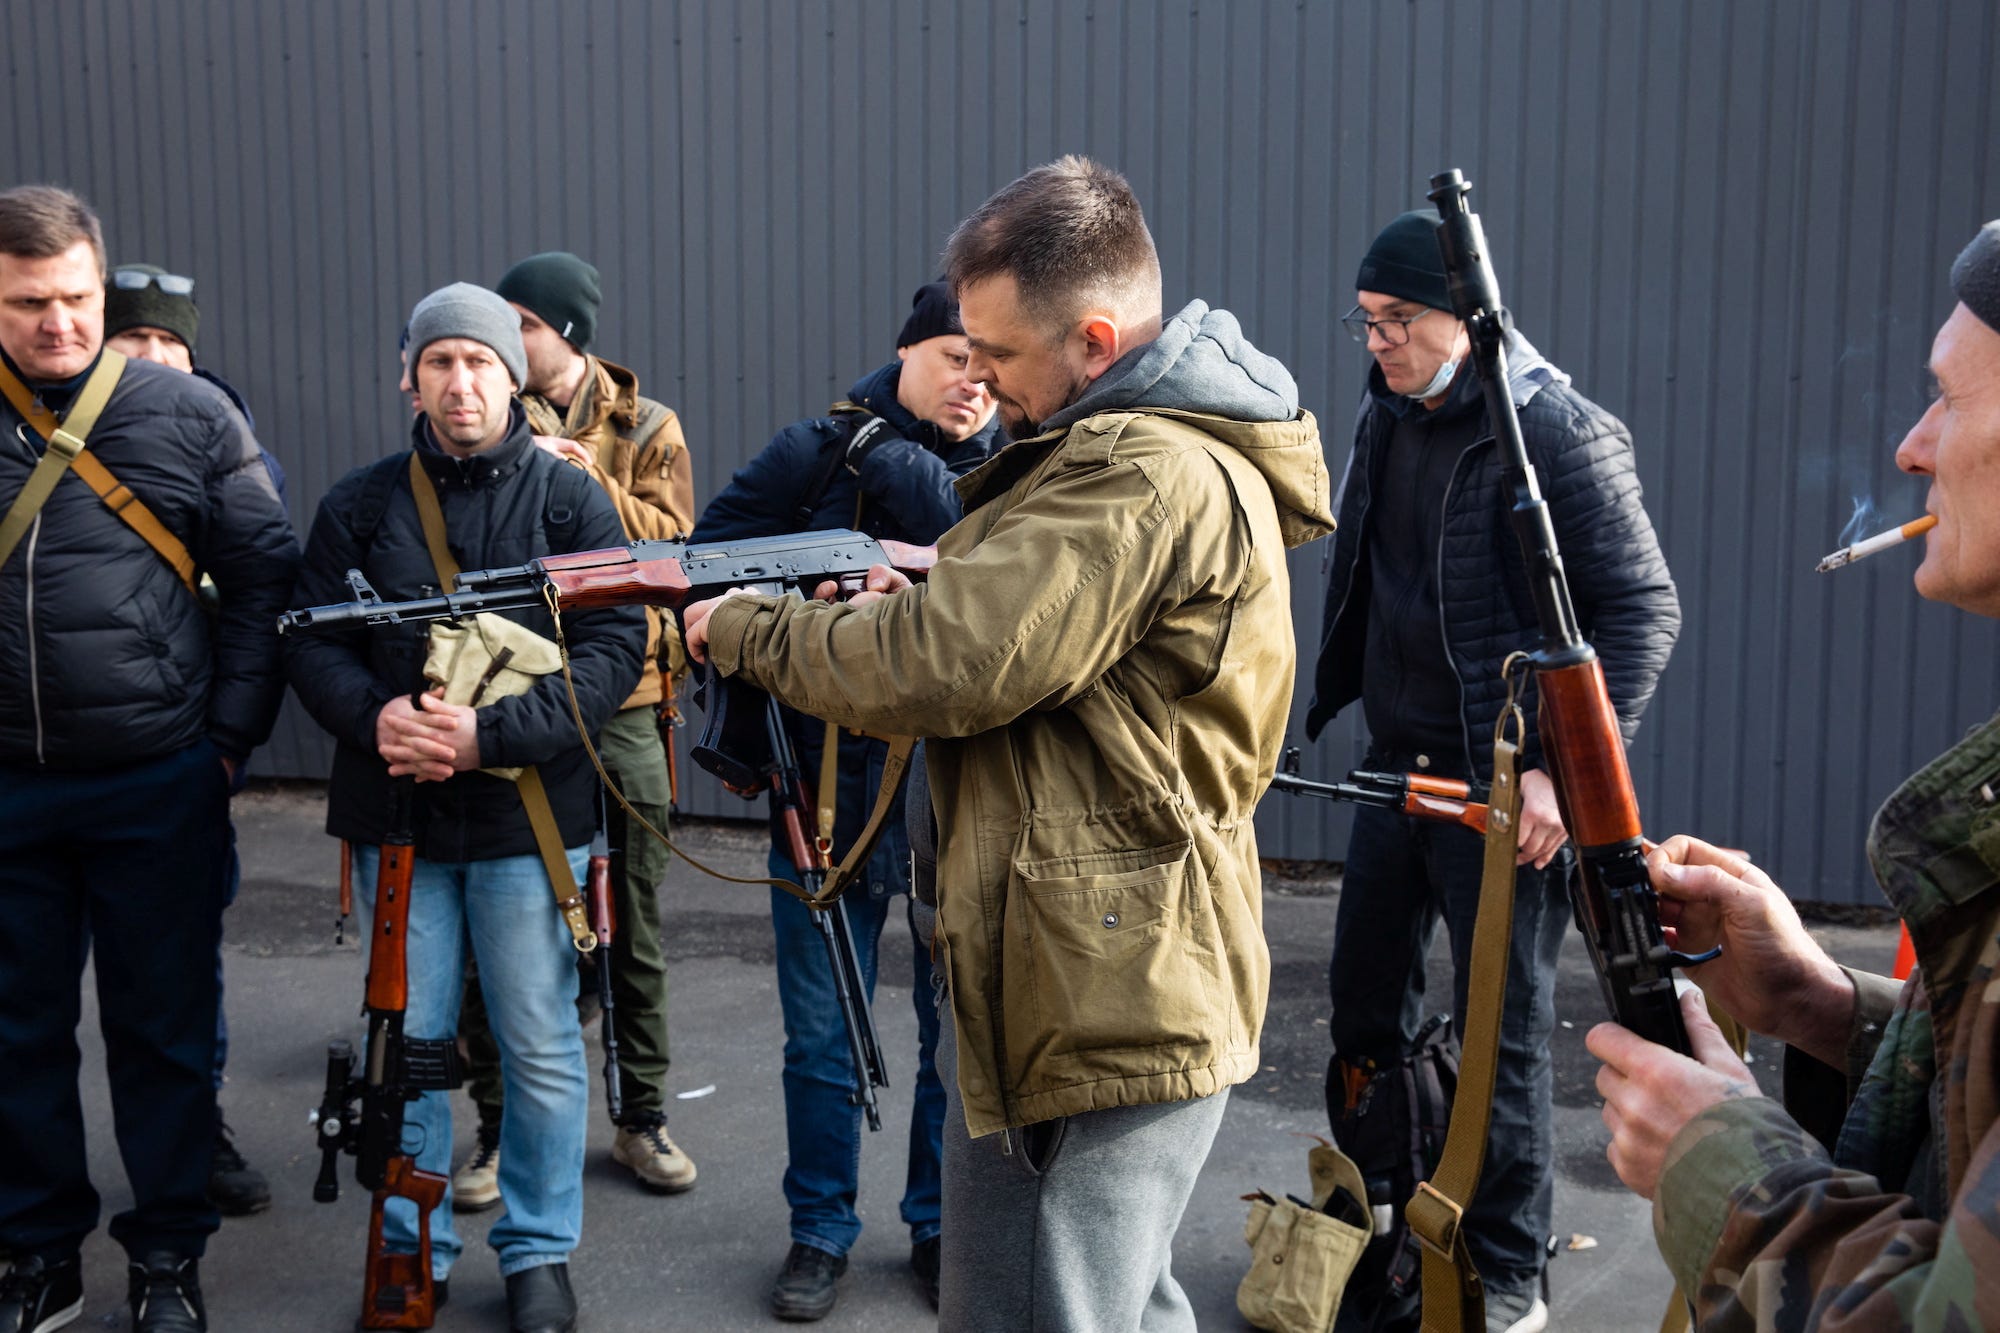 Members of the Territorial Defence Forces of Ukraine receive weapons to defend the city of Kyiv, Ukraine February 25, 2022.